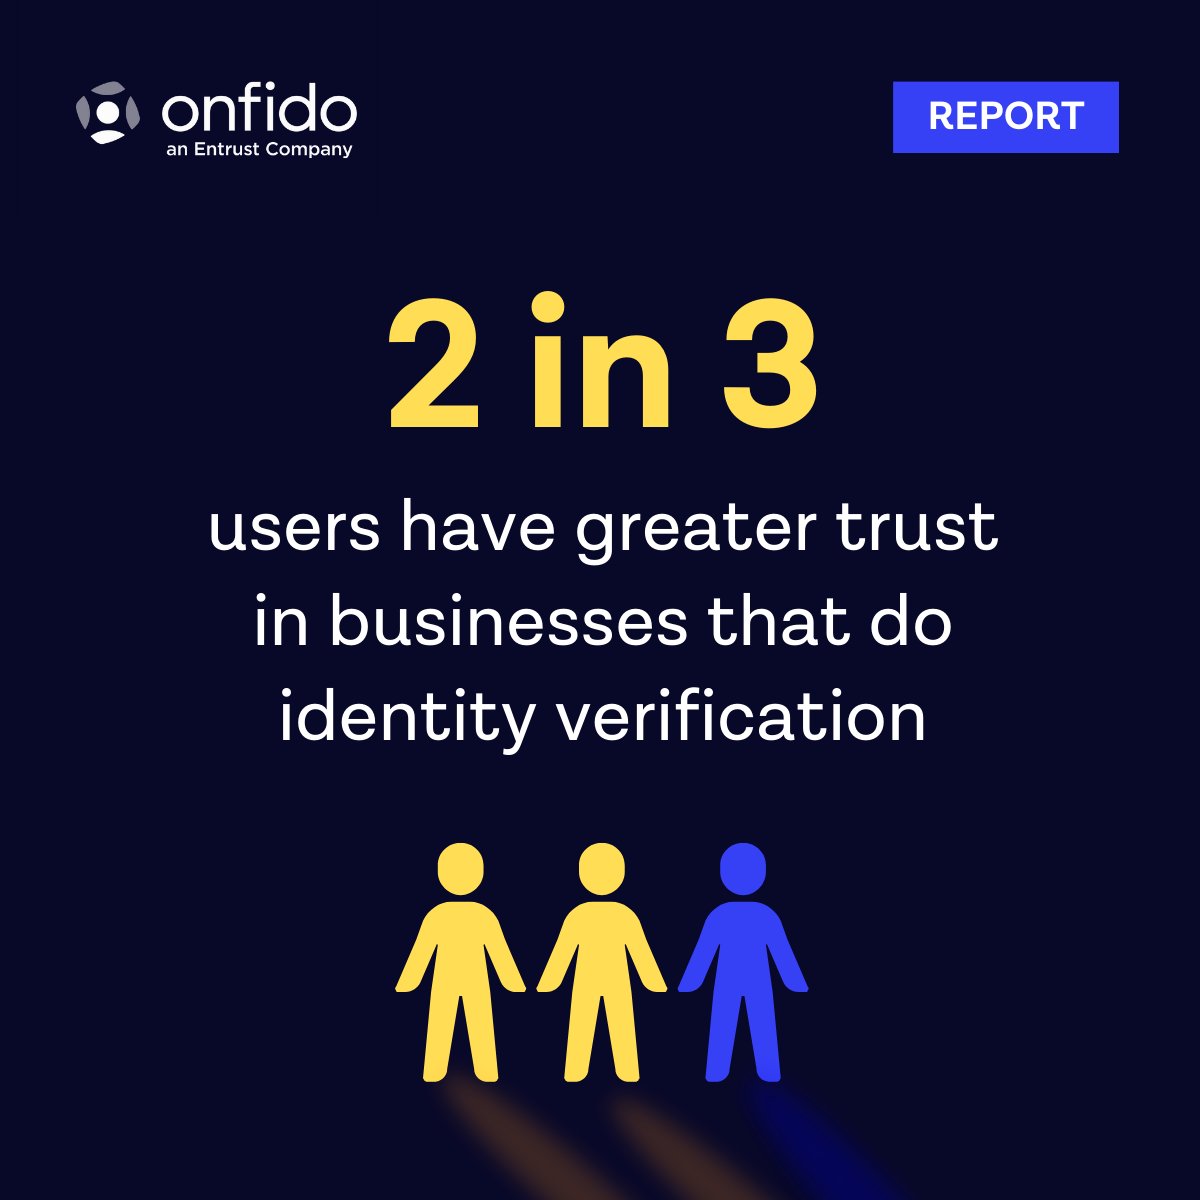 Unlock the secrets to gaining user trust with identity verification. Our latest report dives into their identity verification preferences and the benefits they seek. Download to enhance your onboarding strategy: bit.ly/44Zm1Fm #DigitalOnboarding